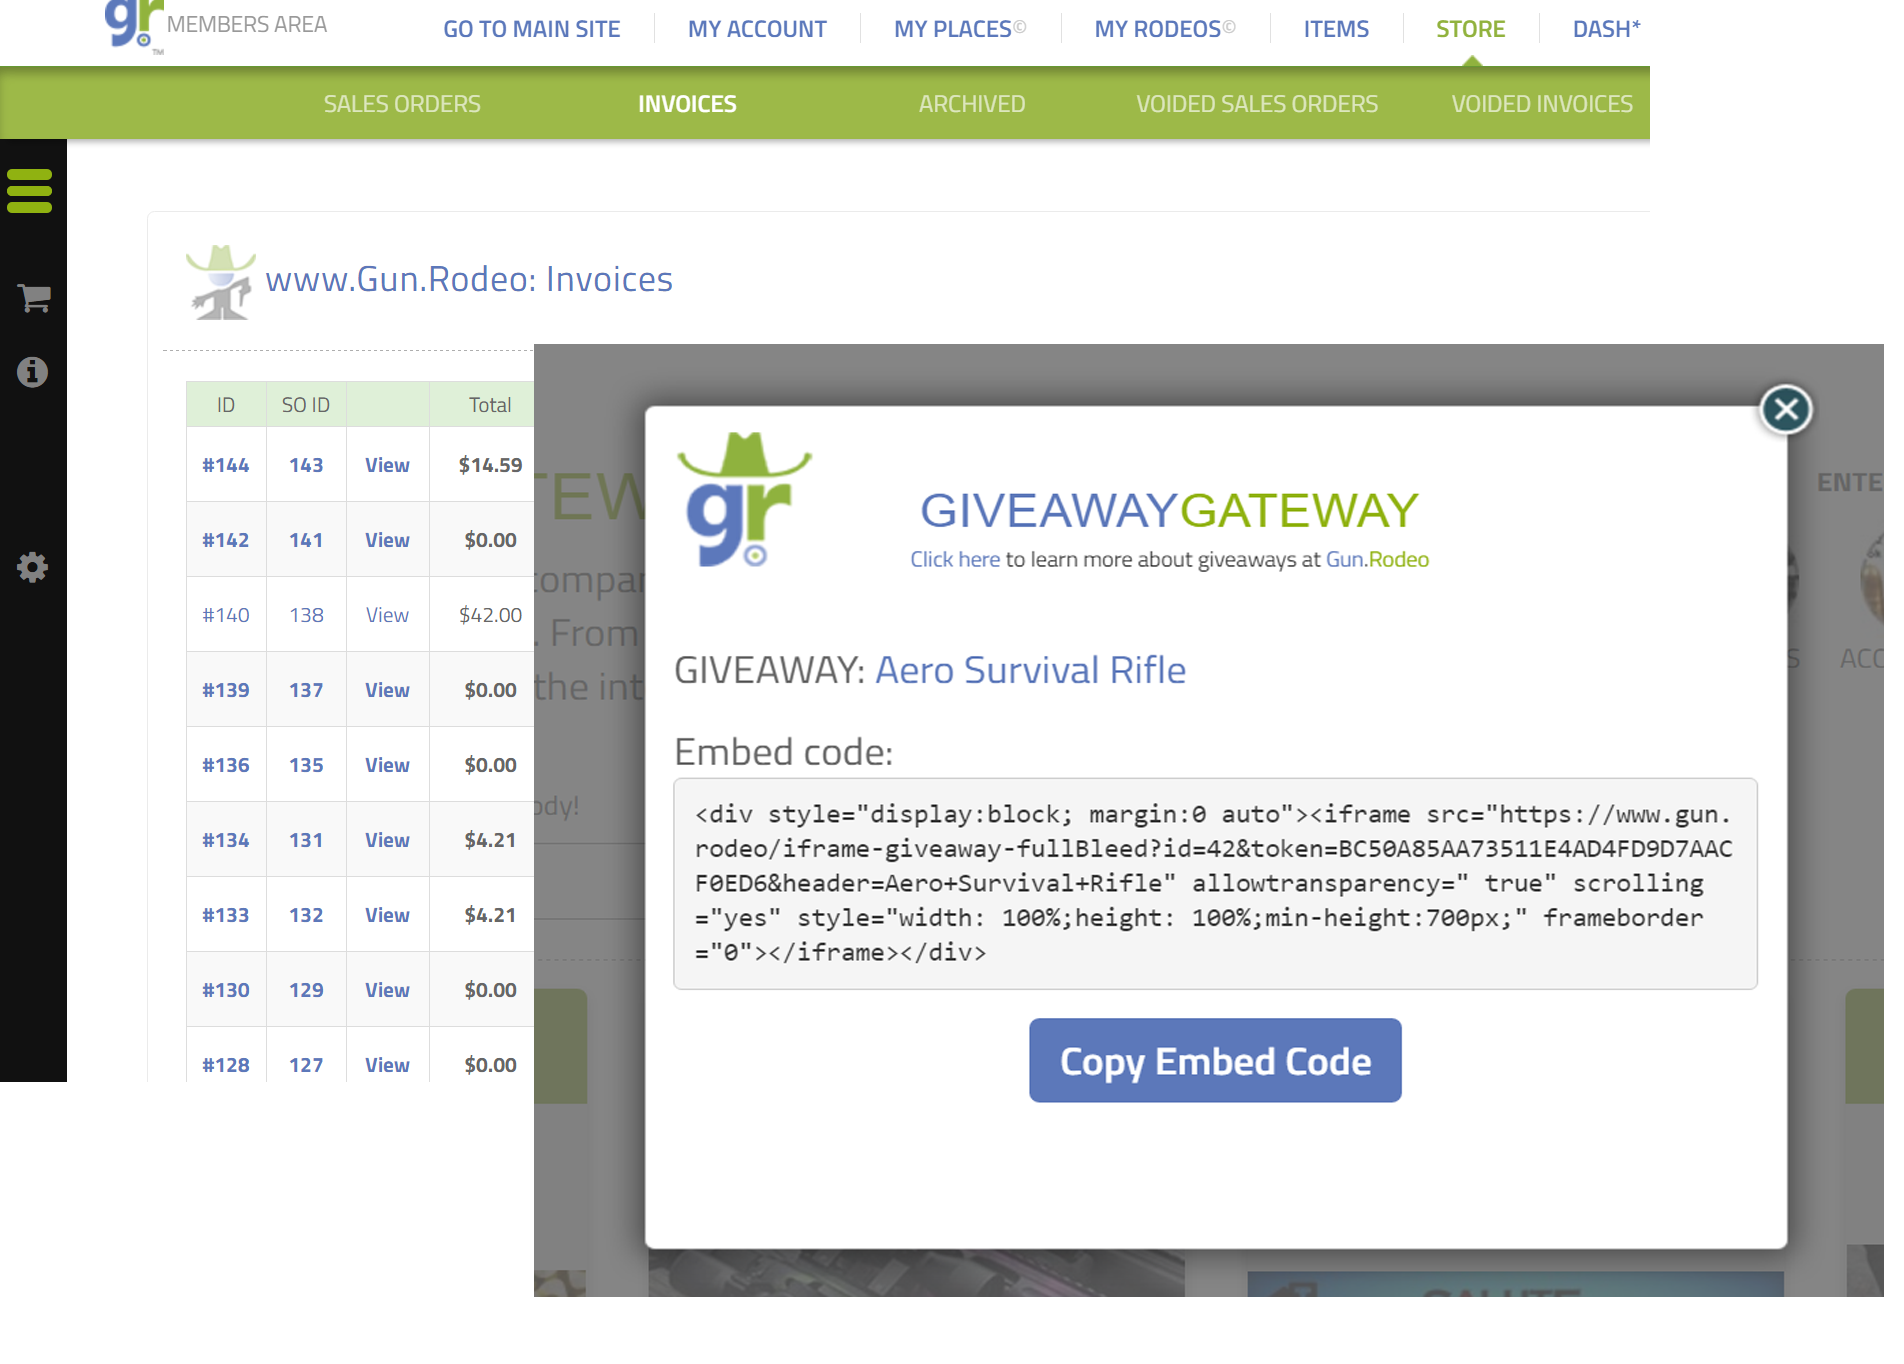 Gun.Rodeo's Giveaway Gateway Platform: Embed your giveaway into the Gun.Rodeo display network